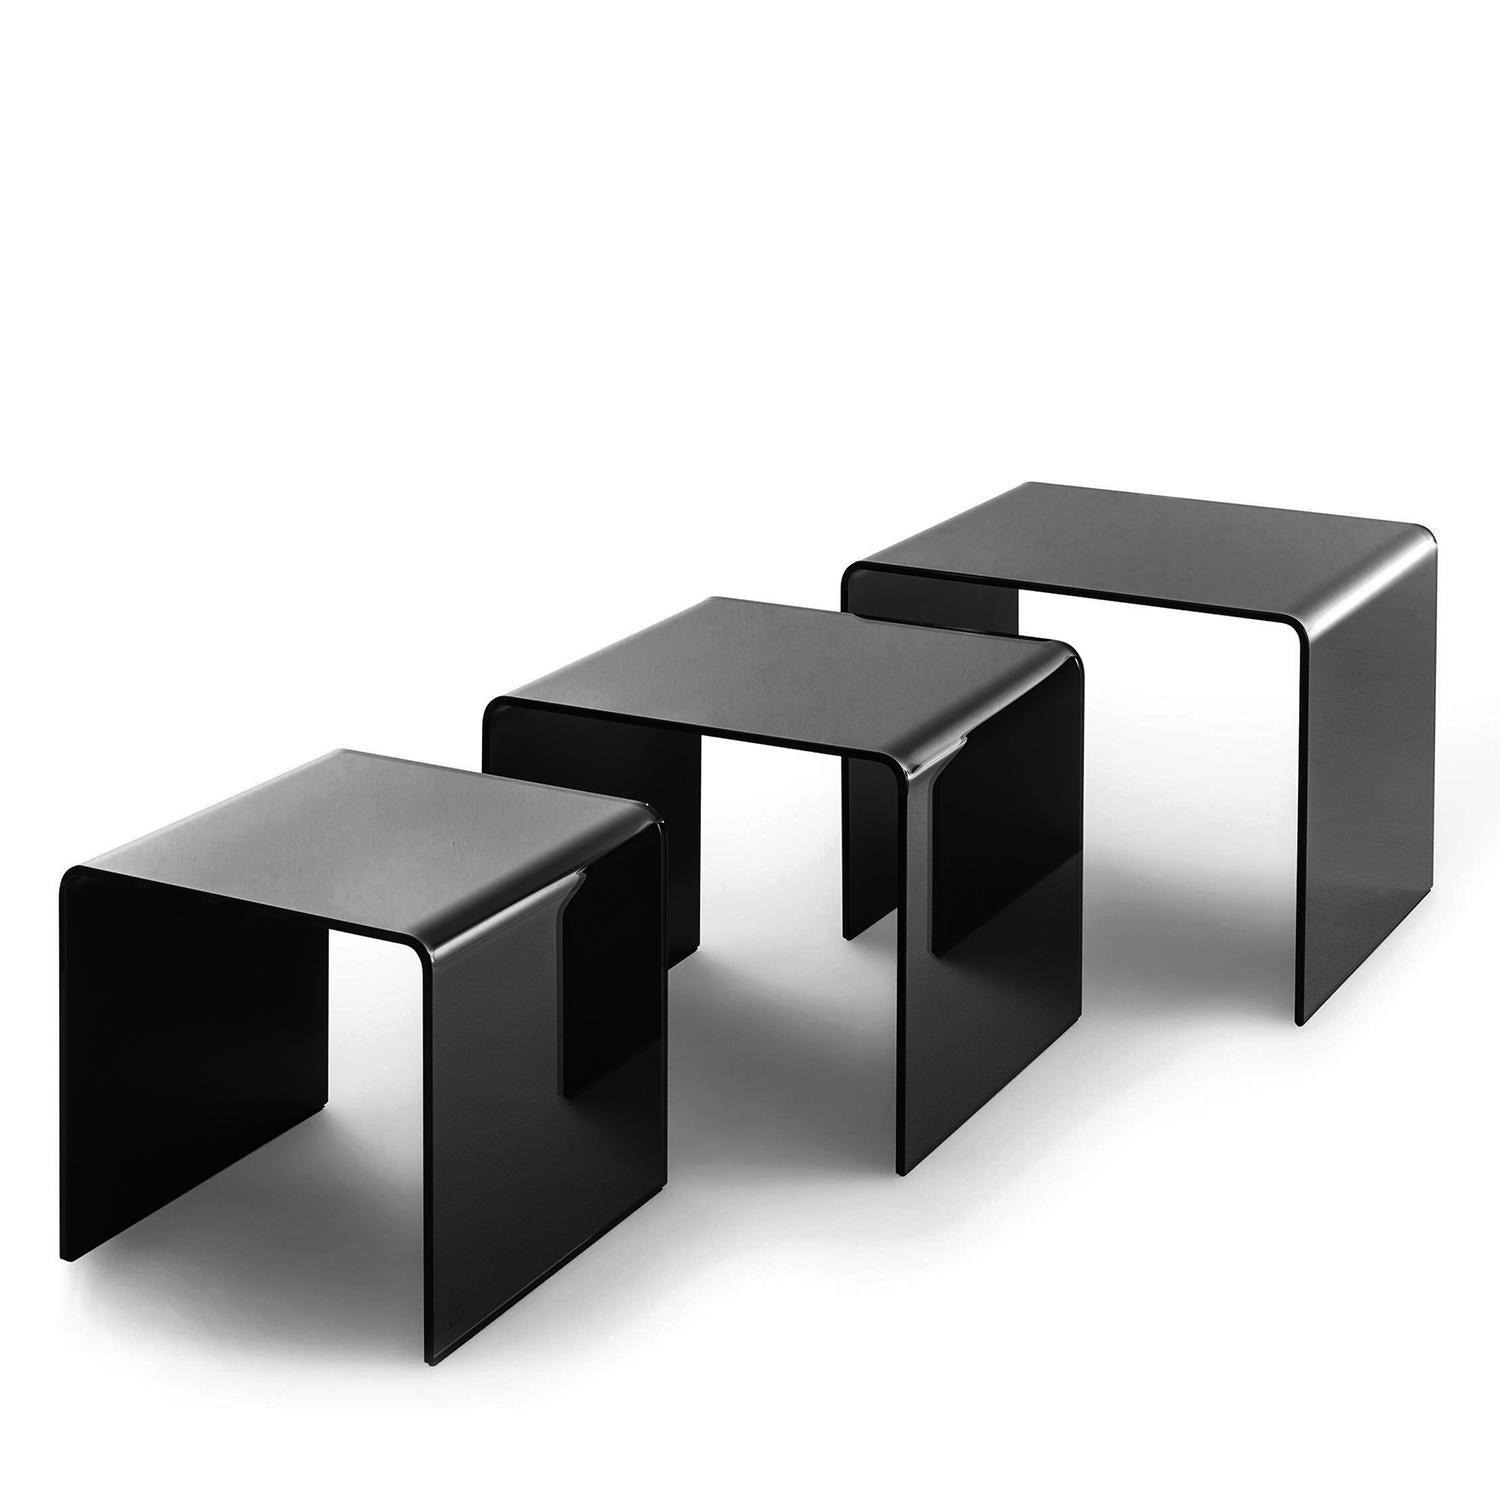 Side Table Arty Set of 3 with structure in curved glass,
10mm thickness. Glass in deep black finish.
Side table A/ L 39,5 x D 40 x H 37,5cm.
Side table B/ L 47,5 x D 45 x H 41,5cm.
Side table C/ L 55,5 x D 50 x H 45,5cm.
Also available in clear